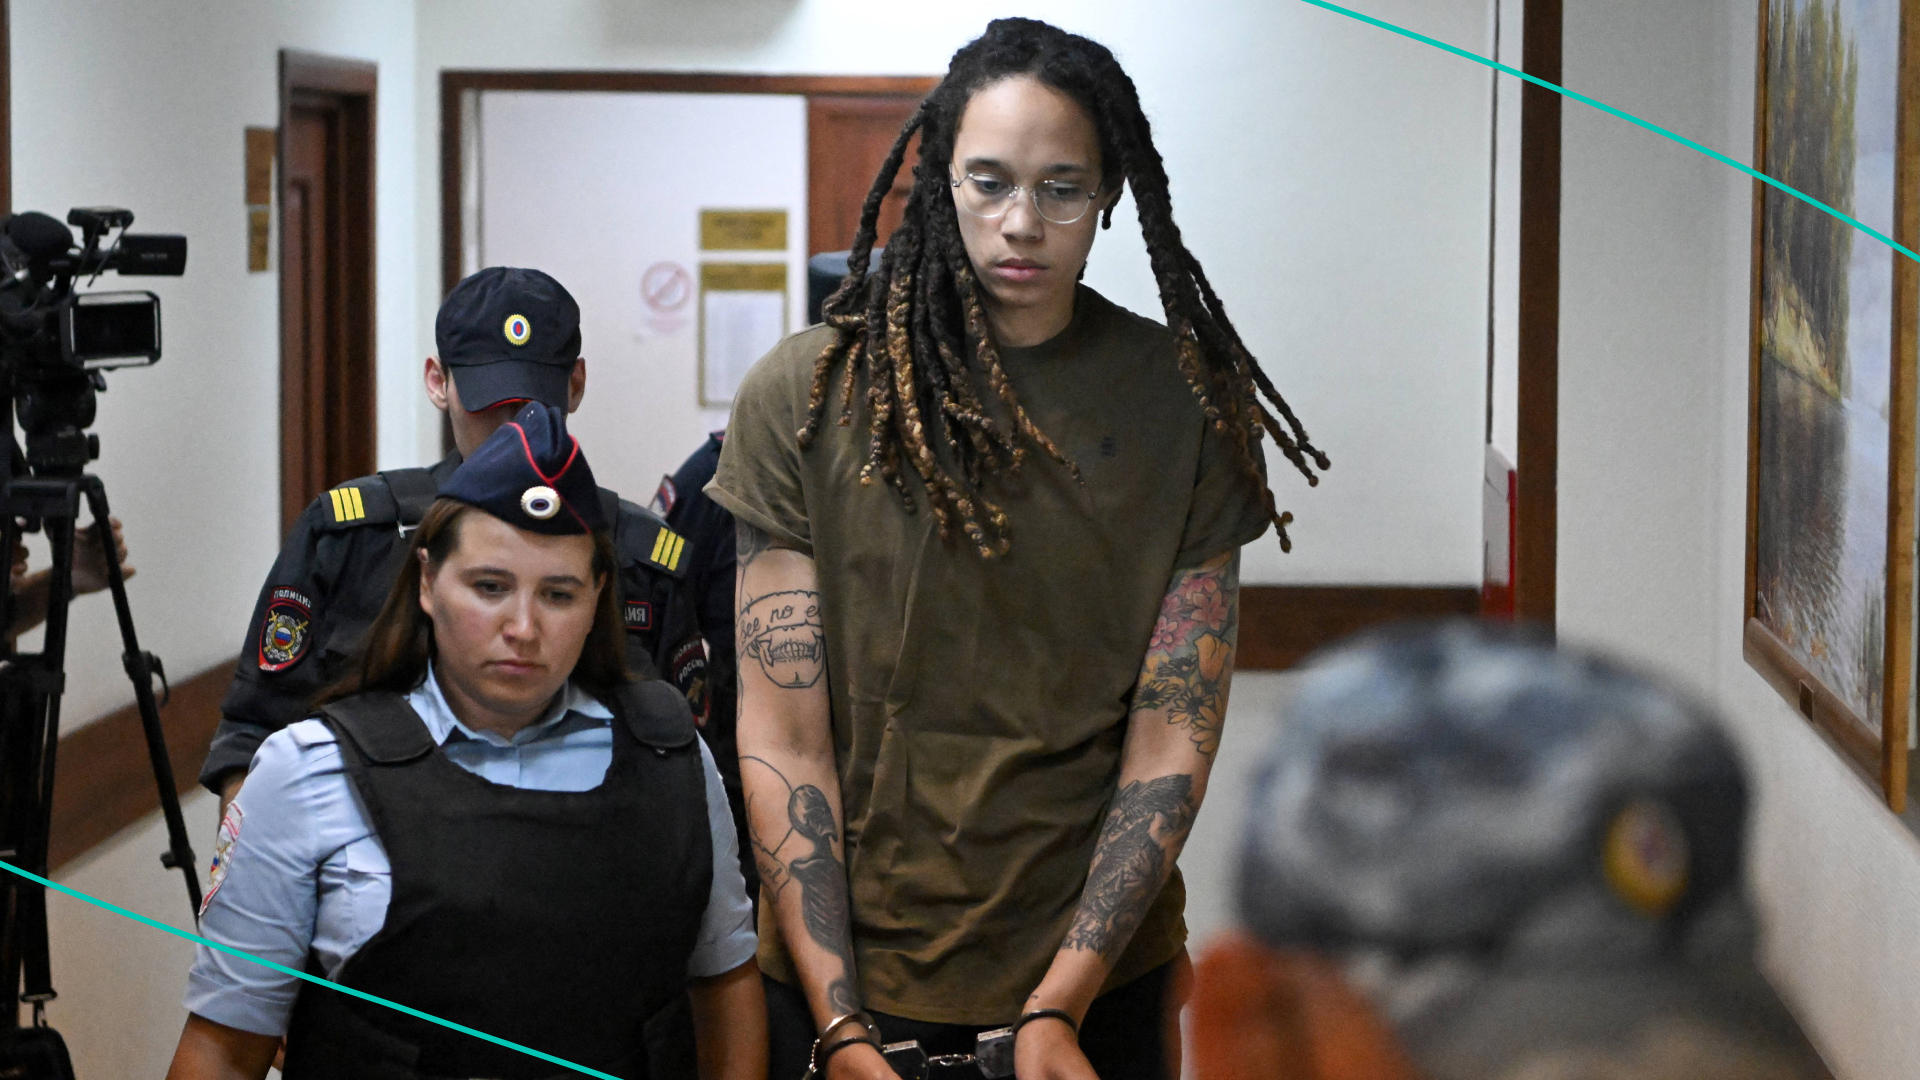 Brittney Griner's parents and siblings were completely supportive of her following her arrest.